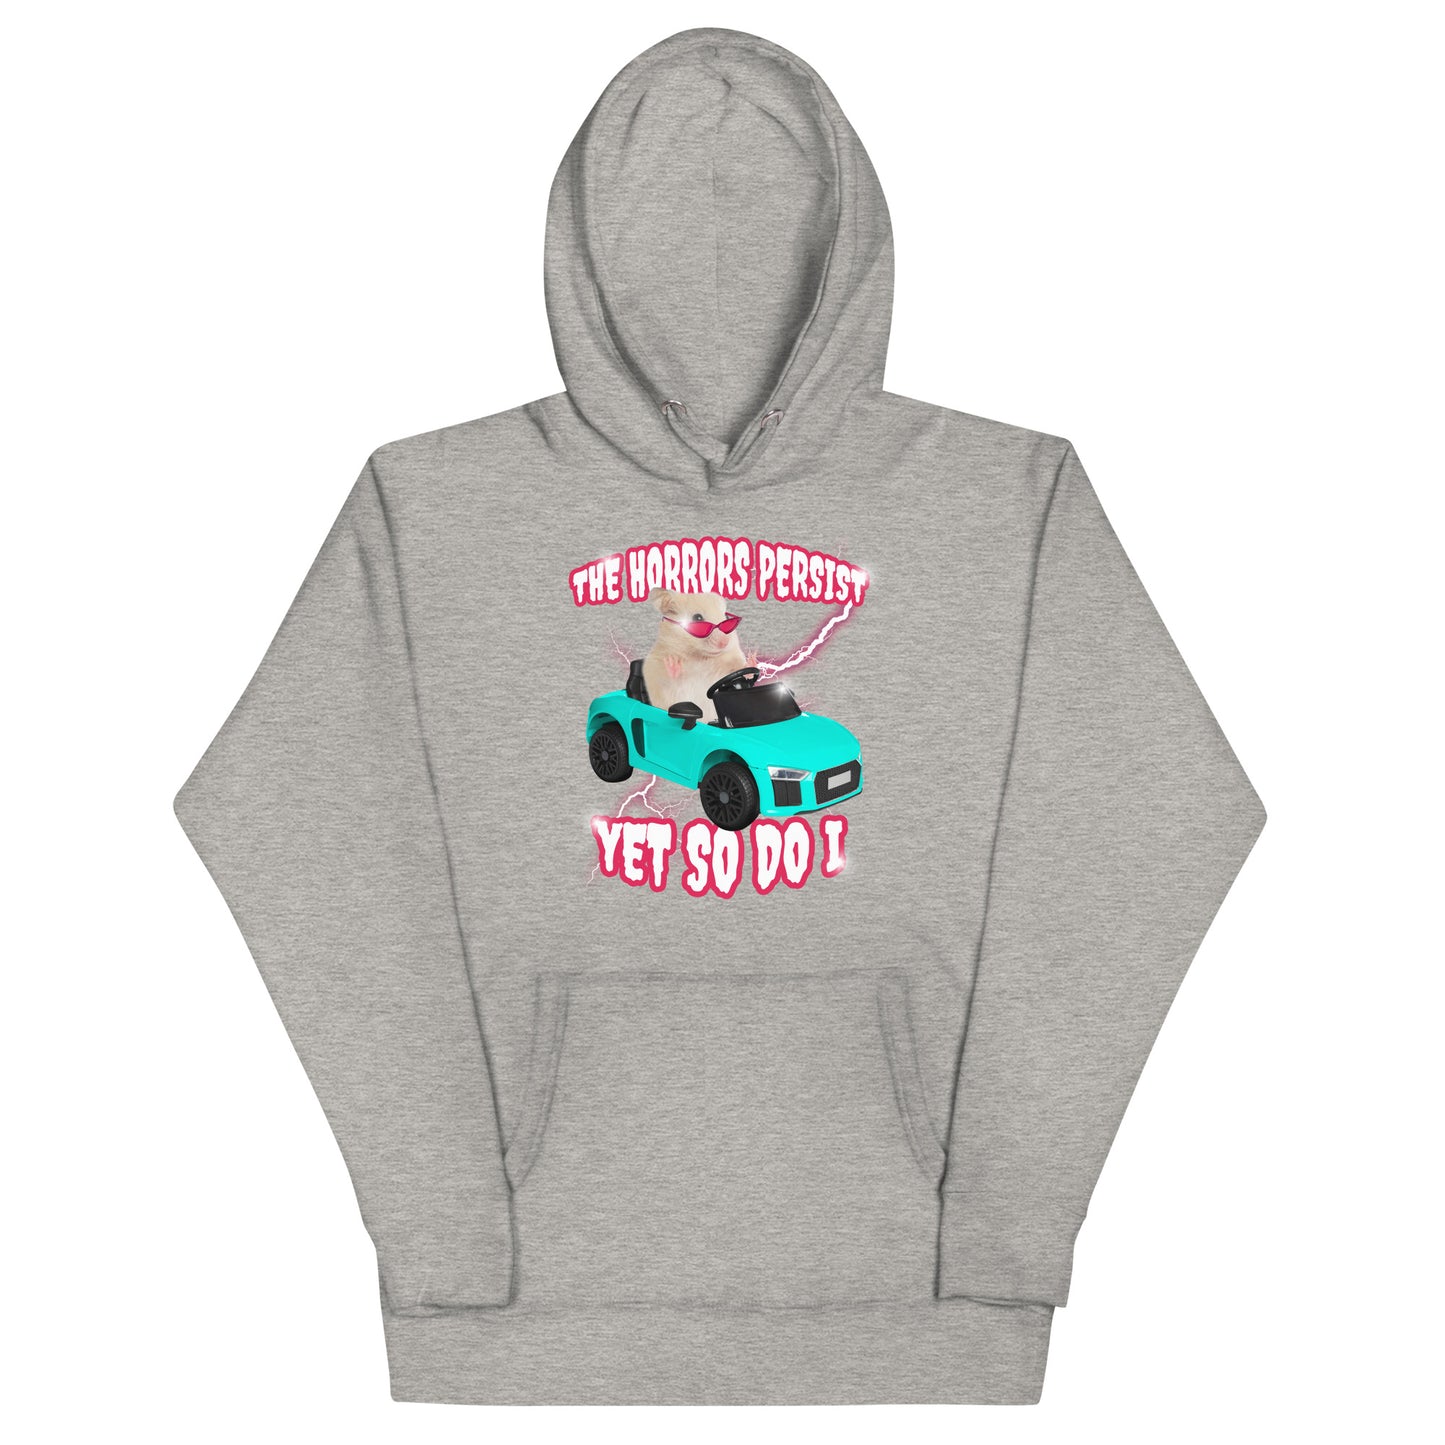 The Horrors Persist Yet So Do I Unisex Hoodie